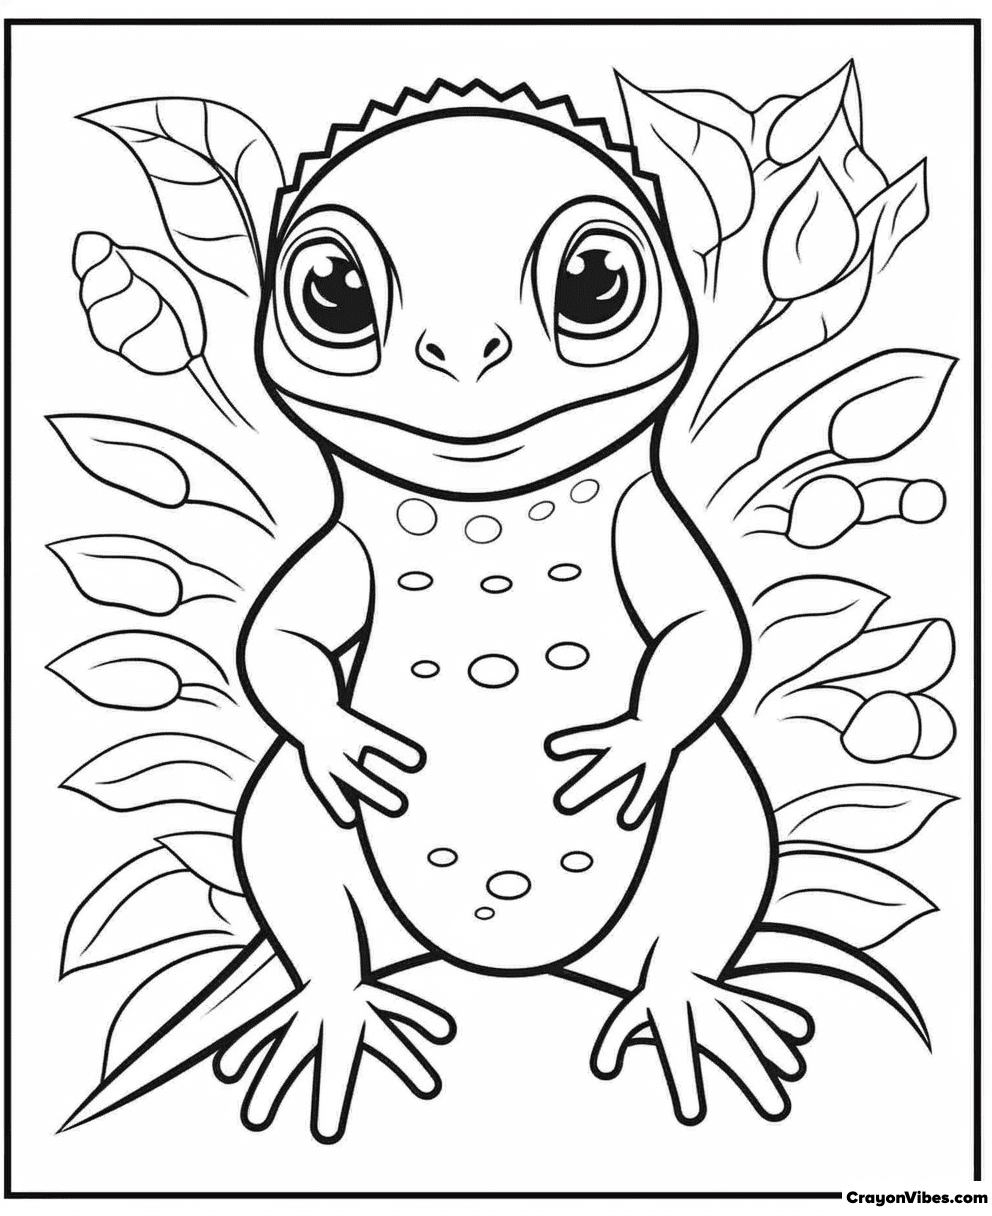 Gecko Coloring Pages Free Printable for Kids and Adults